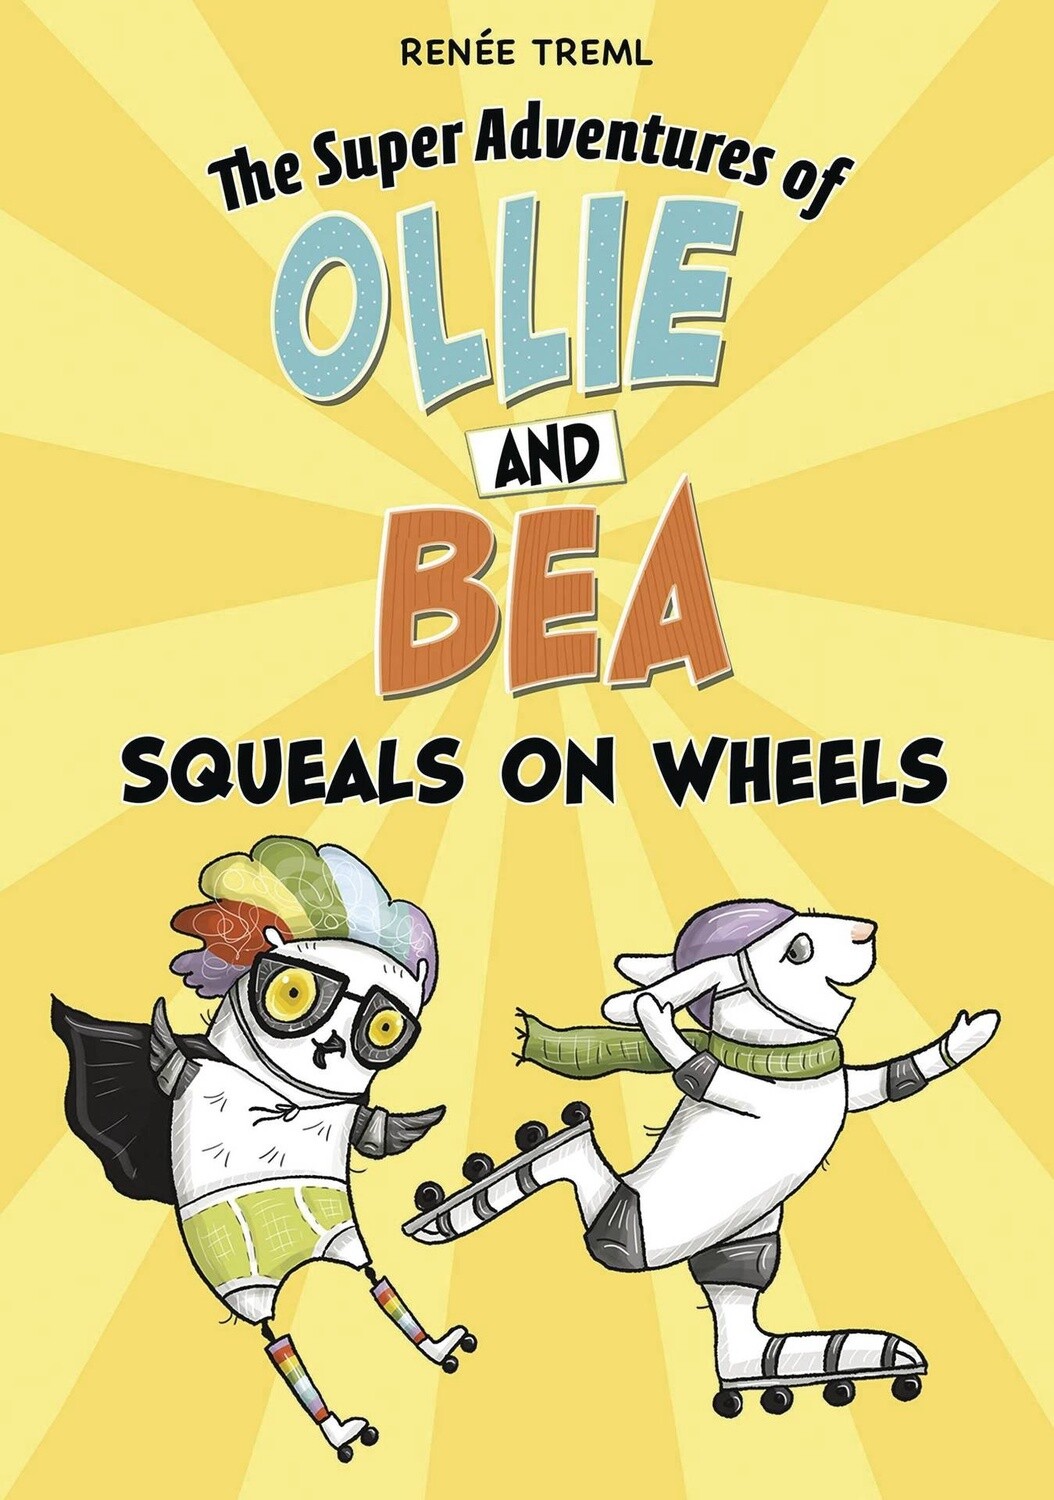 Super Adventures of Ollie & Bea: Squeals On Wheels